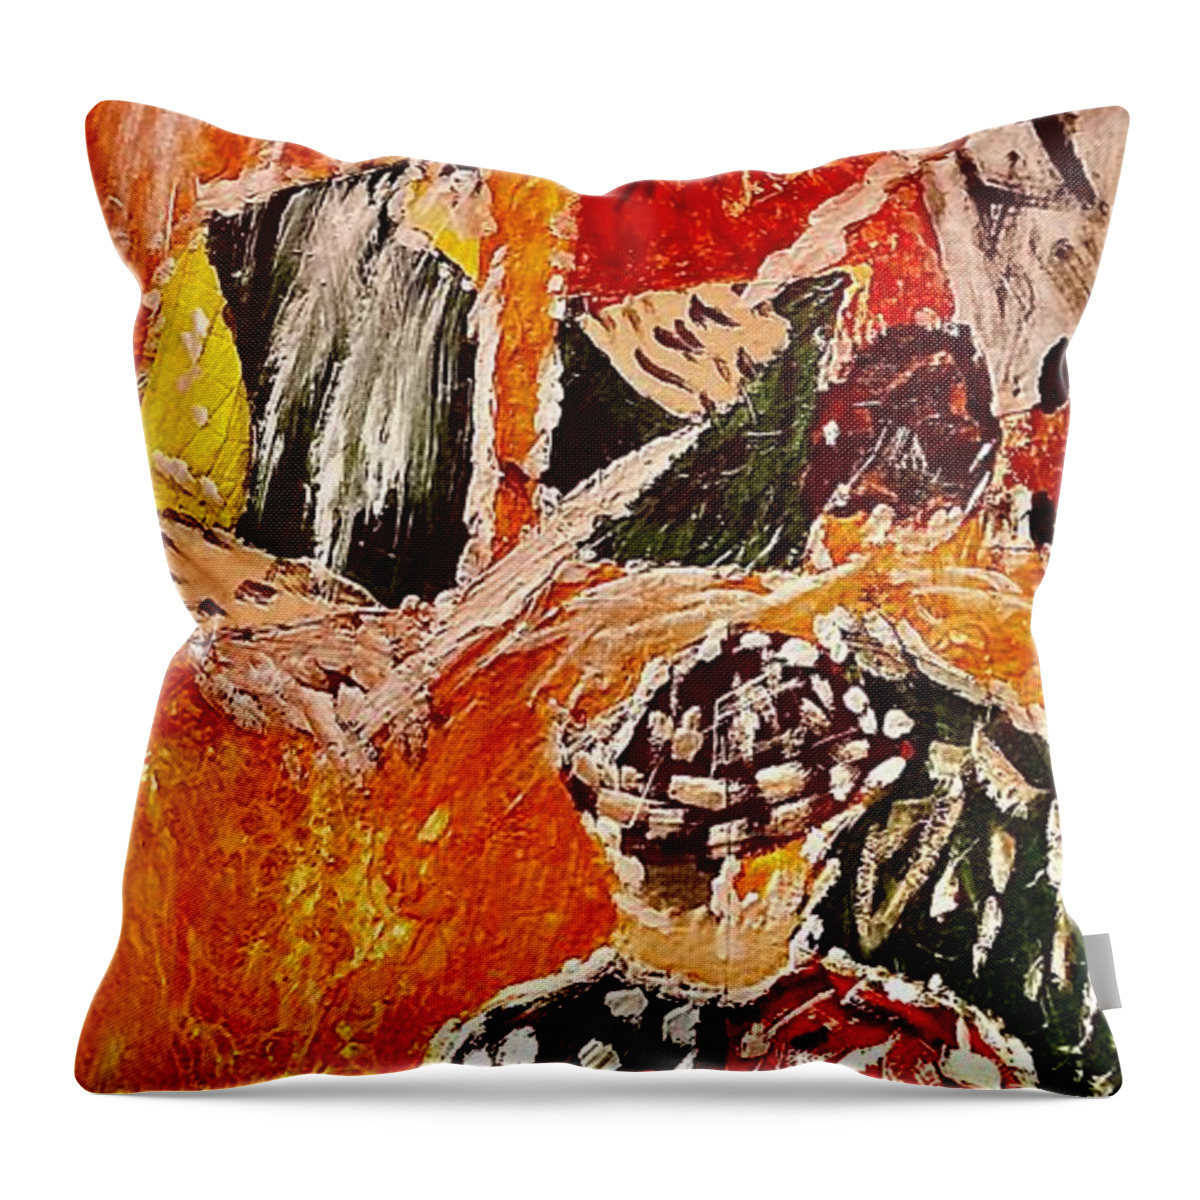  Throw Pillow featuring the painting Iconic Rodeo Clown by Bencasso Barnesquiat